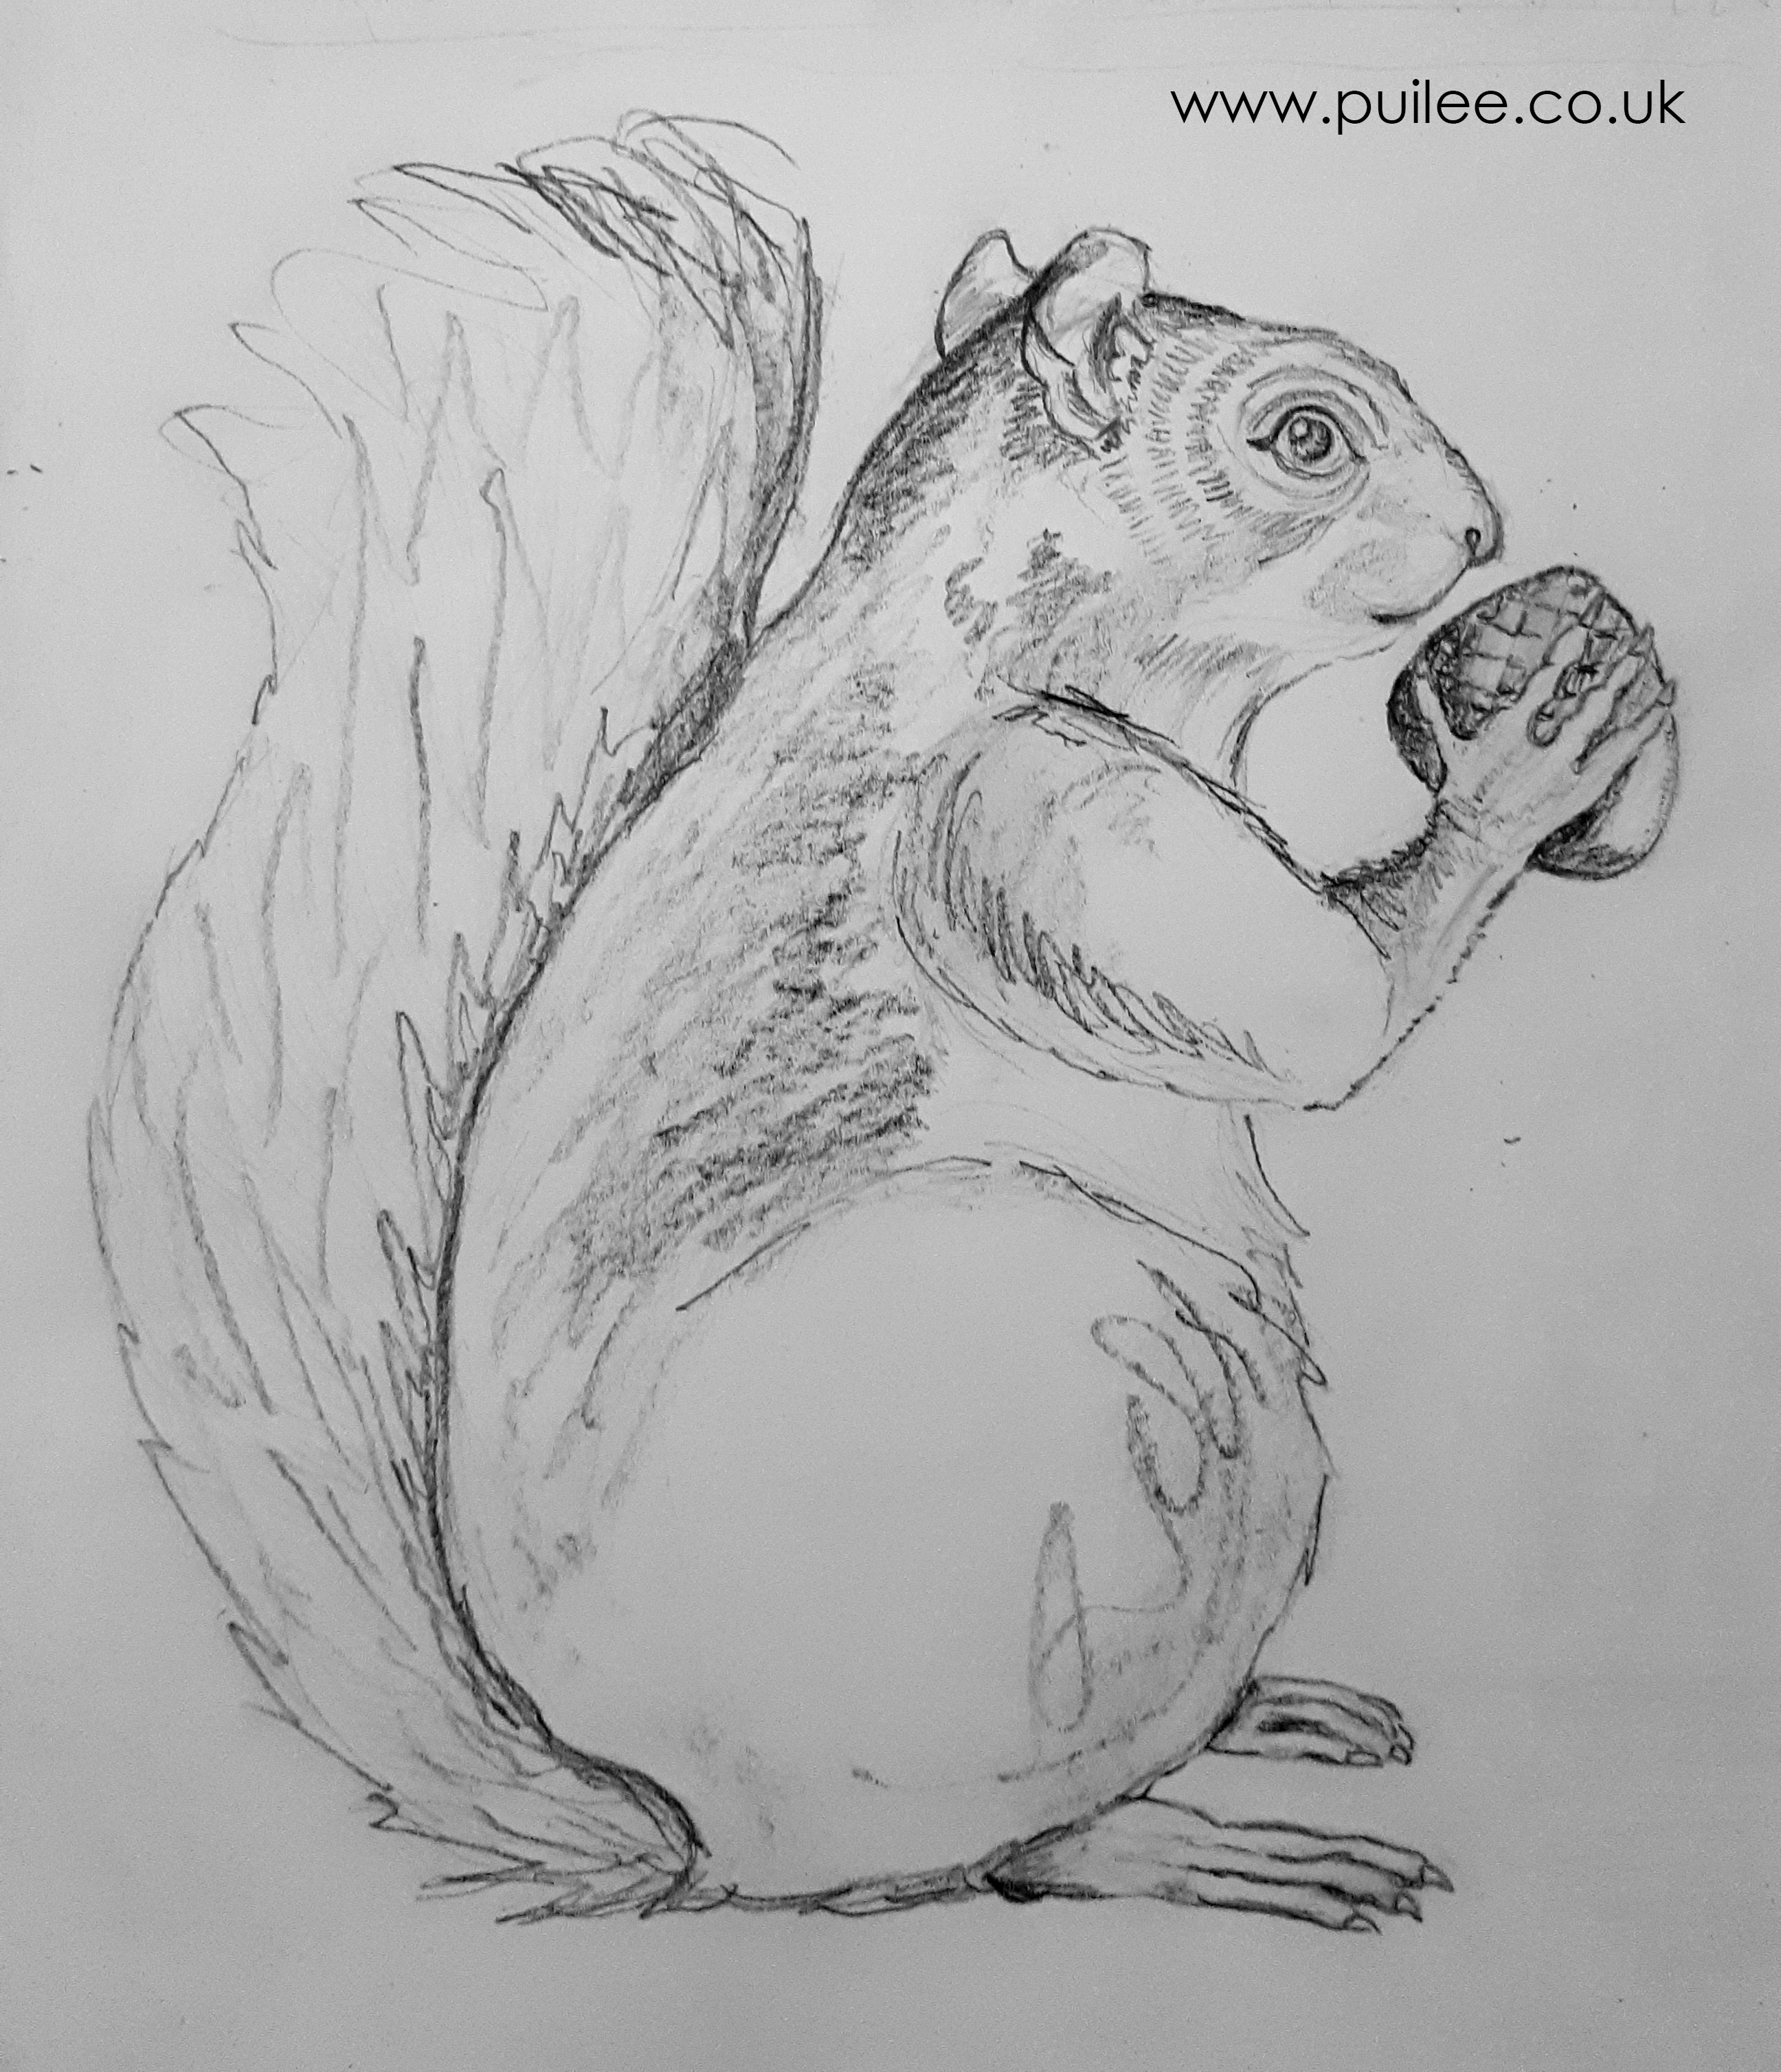 Squirrel (2020) pencil on paper - by Artist Pui Lee